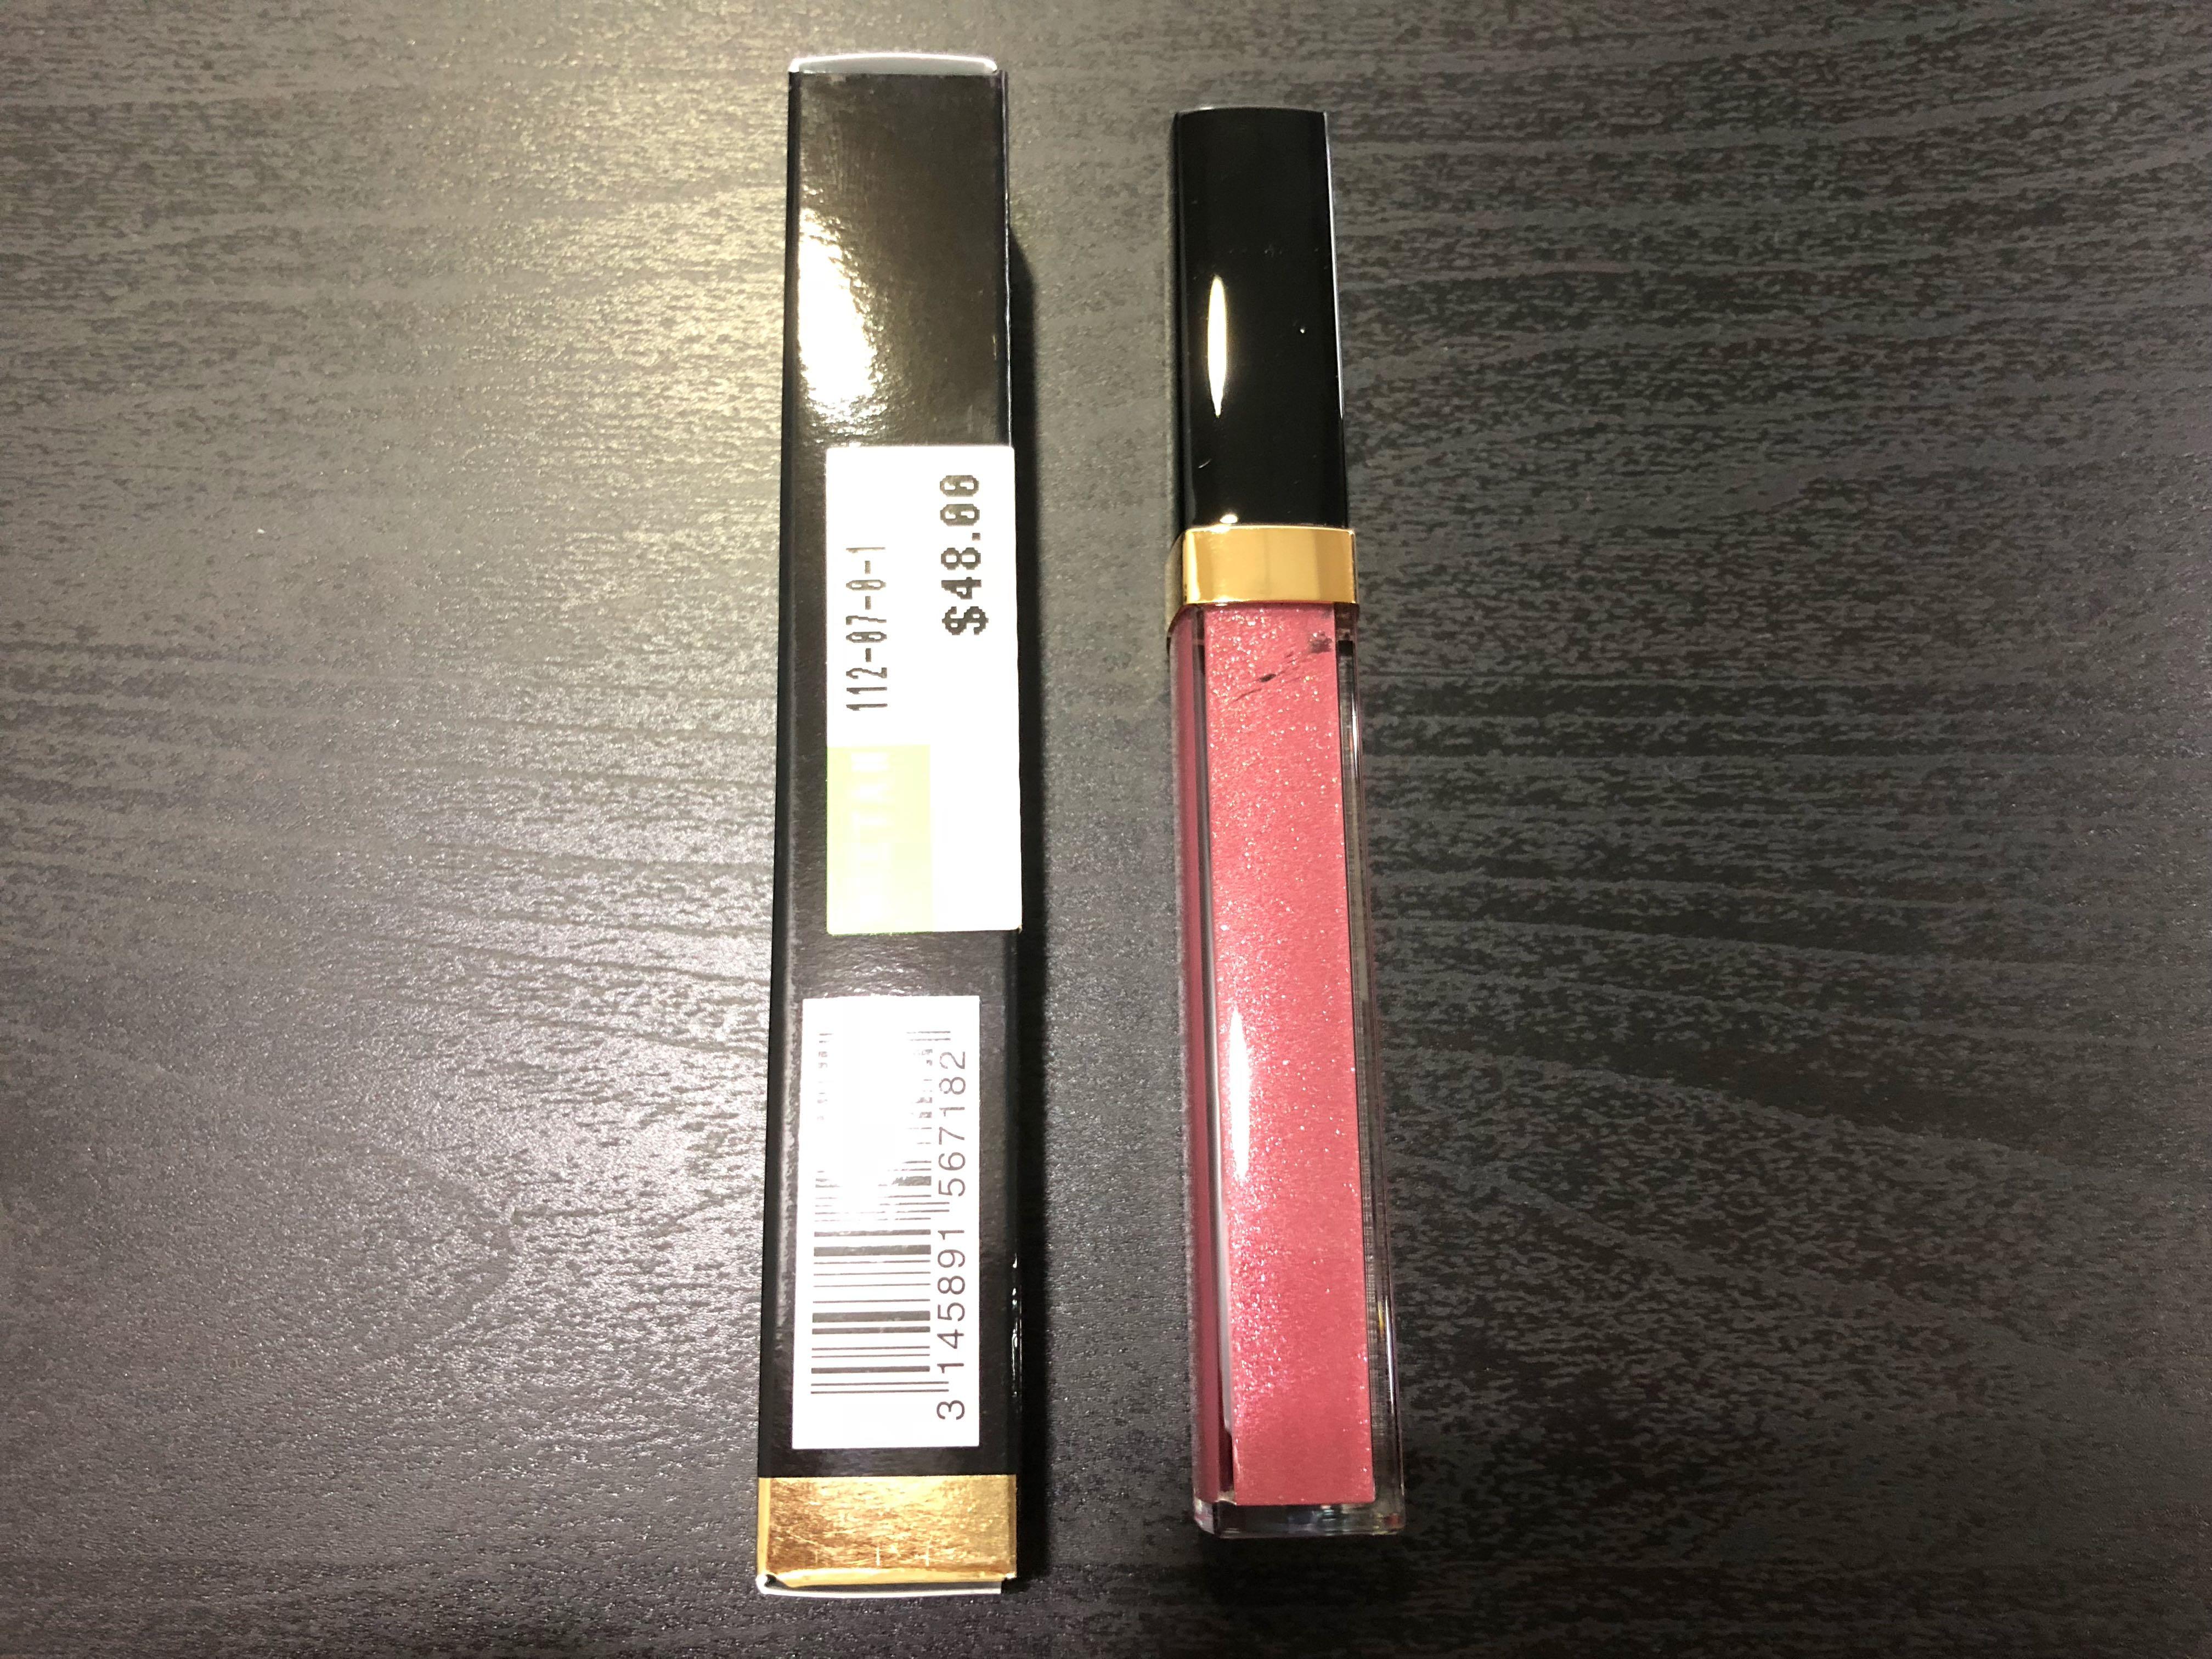 CHANEL ROUGE COCO GLOSS 119 BOURGEOISIE 187002855, Beauty & Personal Care,  Face, Makeup on Carousell